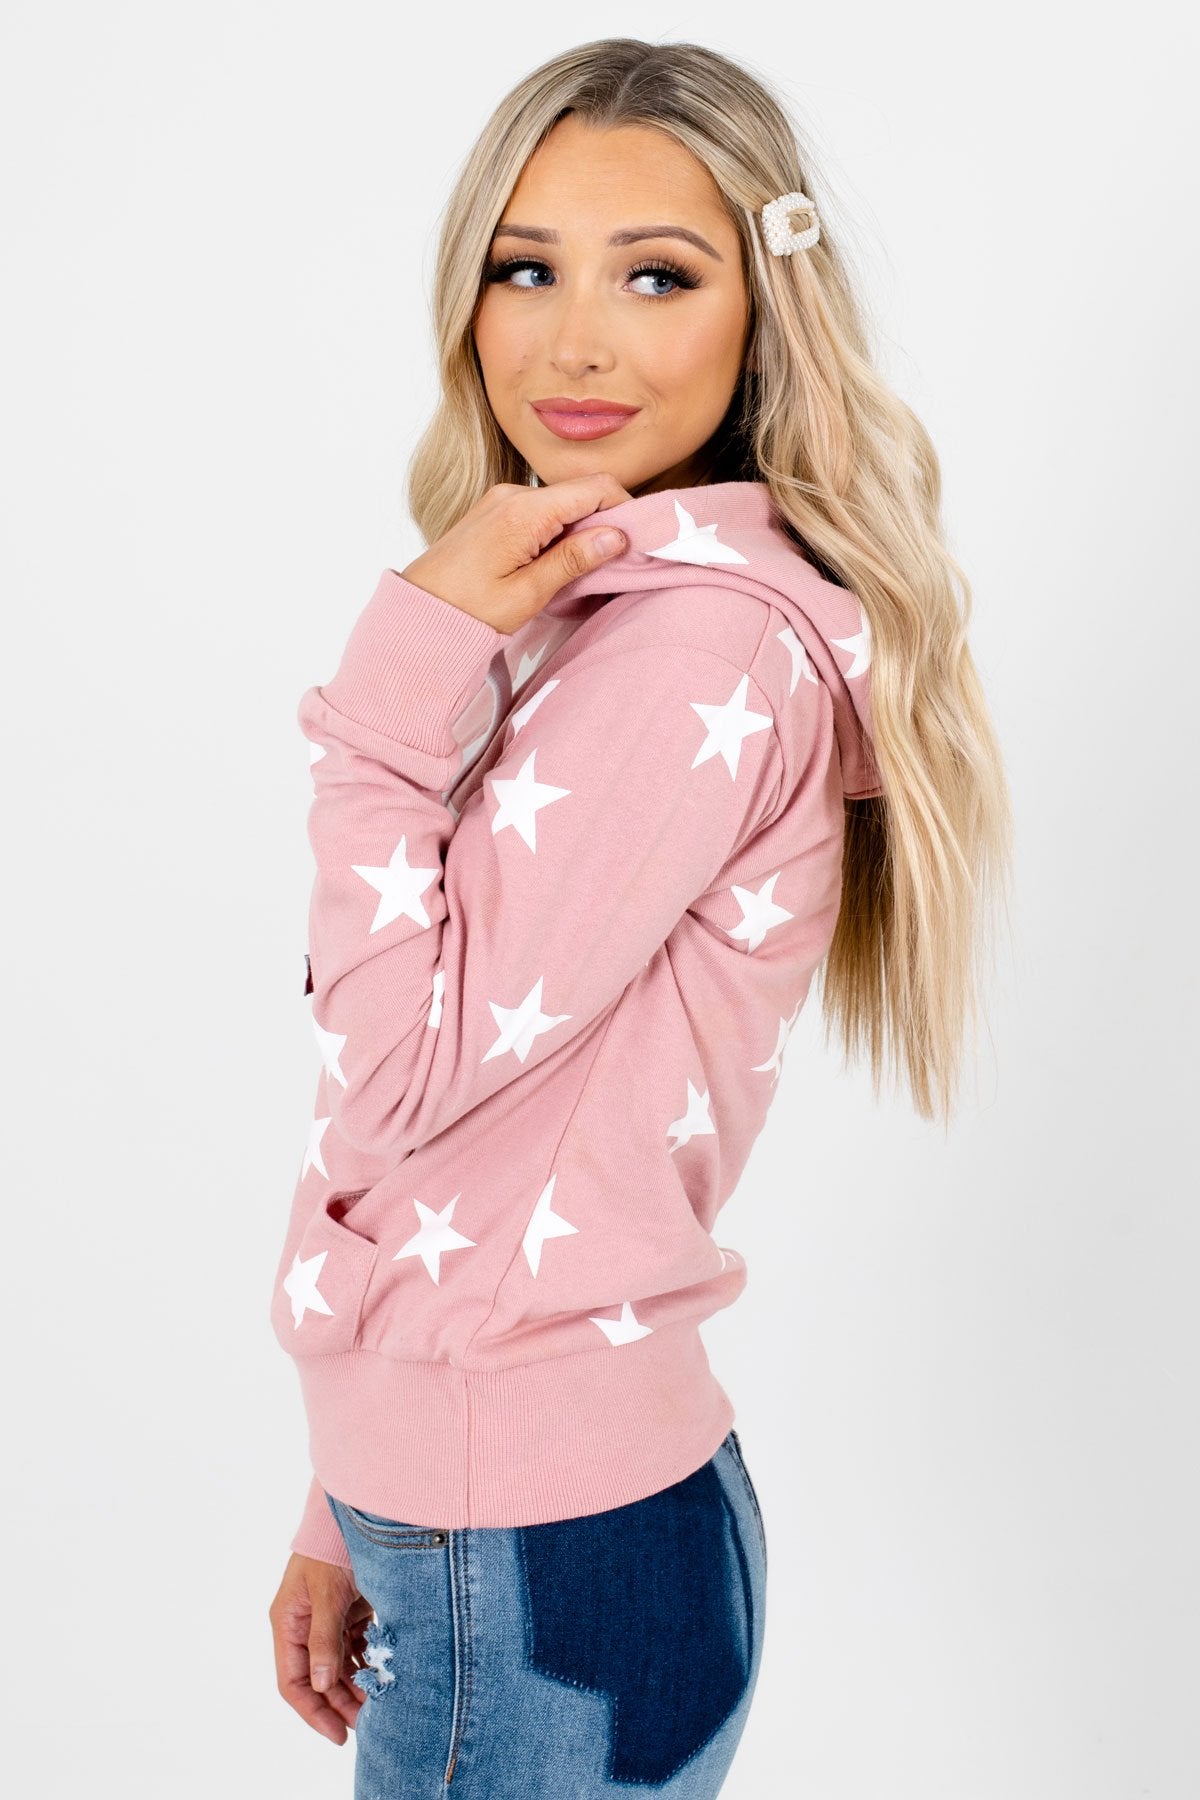 Pink Front Pocket Boutique Hoodies for Women